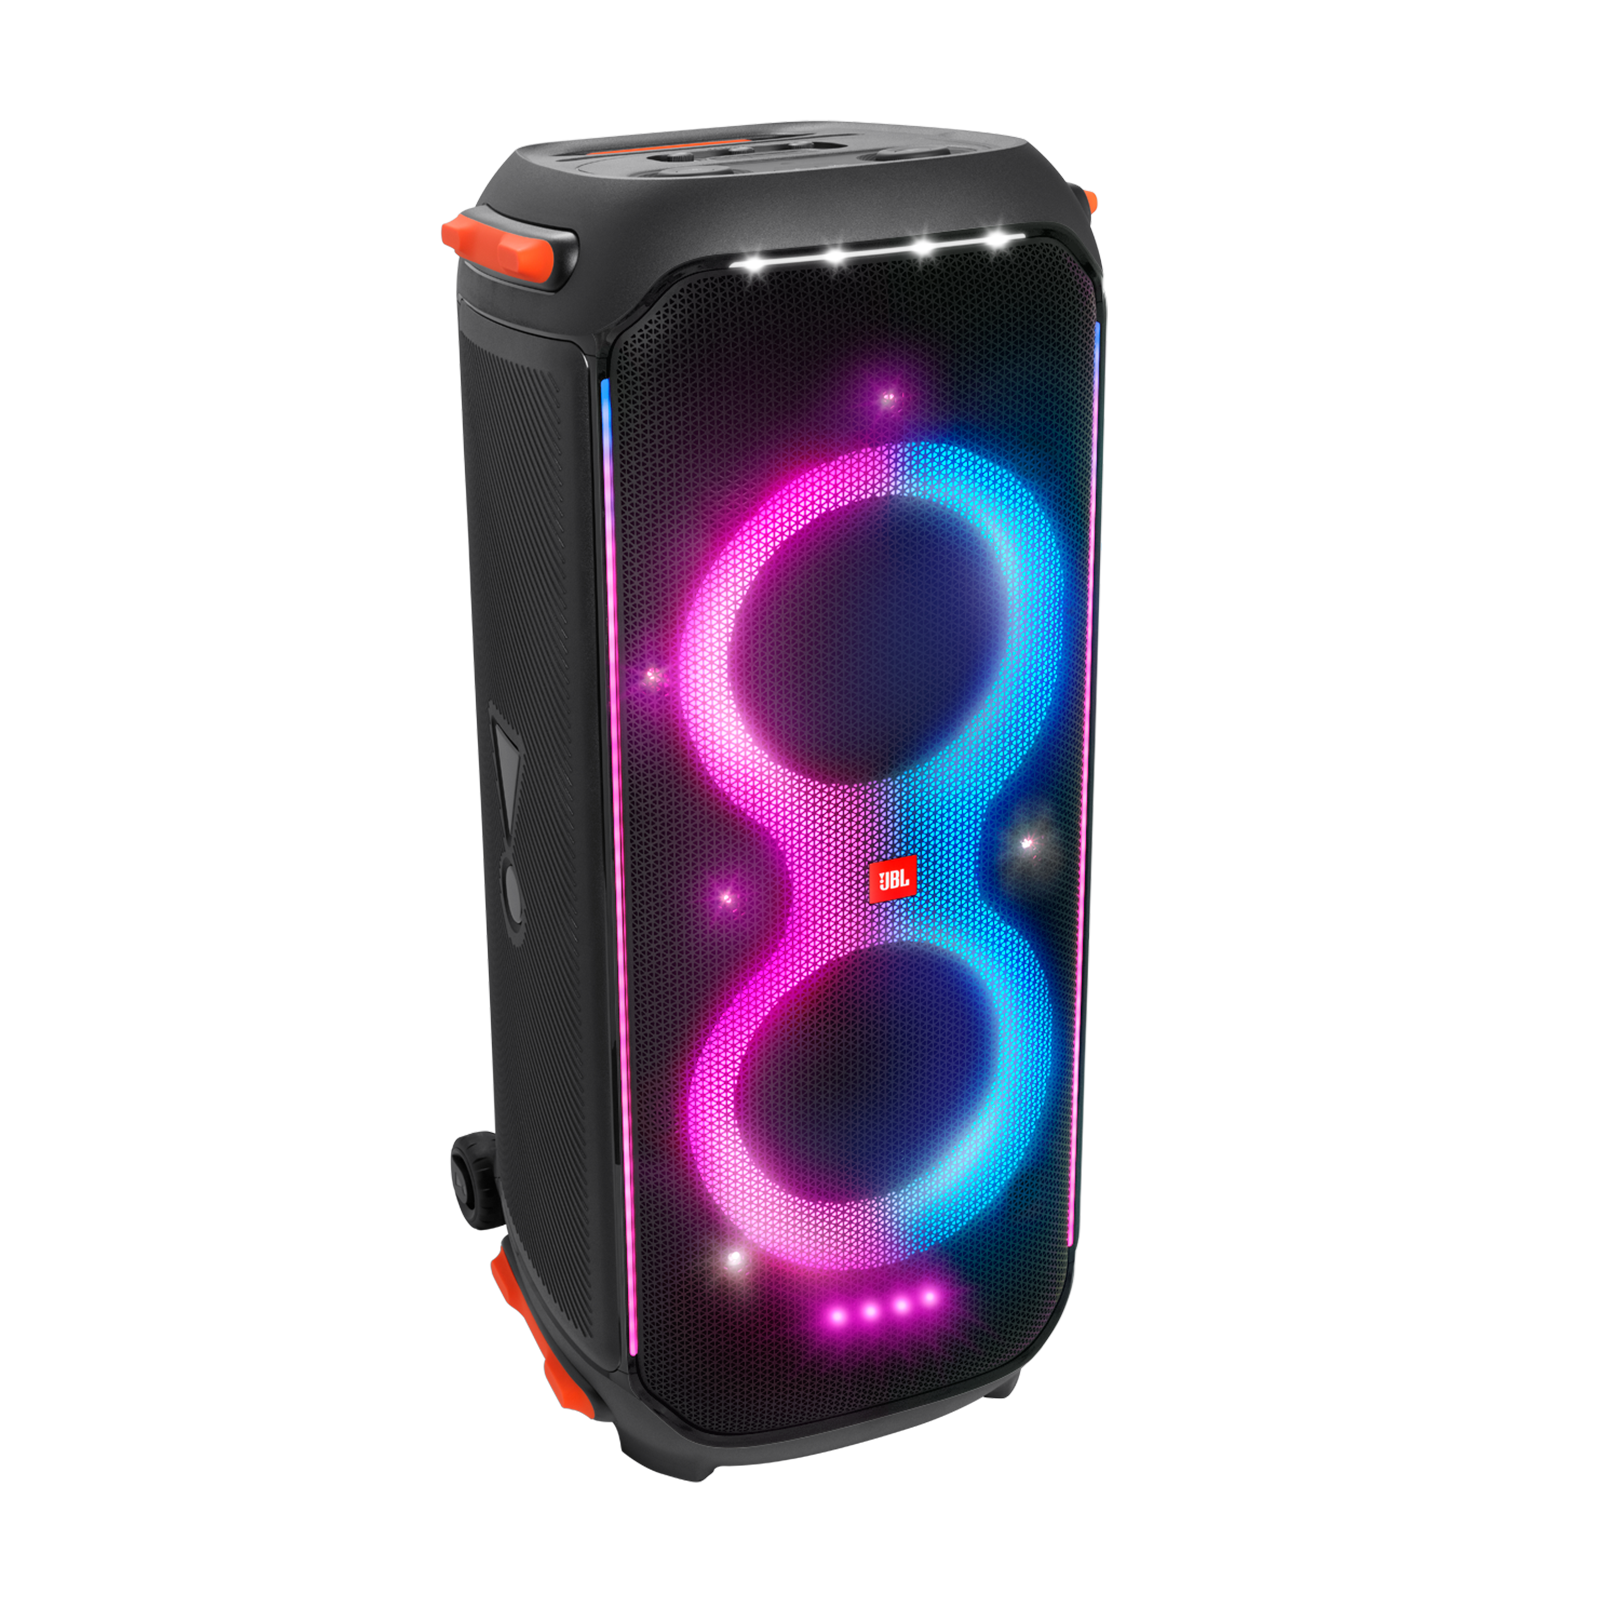 Jbl Partybox 710 | Party Speaker With 800W Rms Powerful Sound, Built-In  Lights And Splashproof Design.